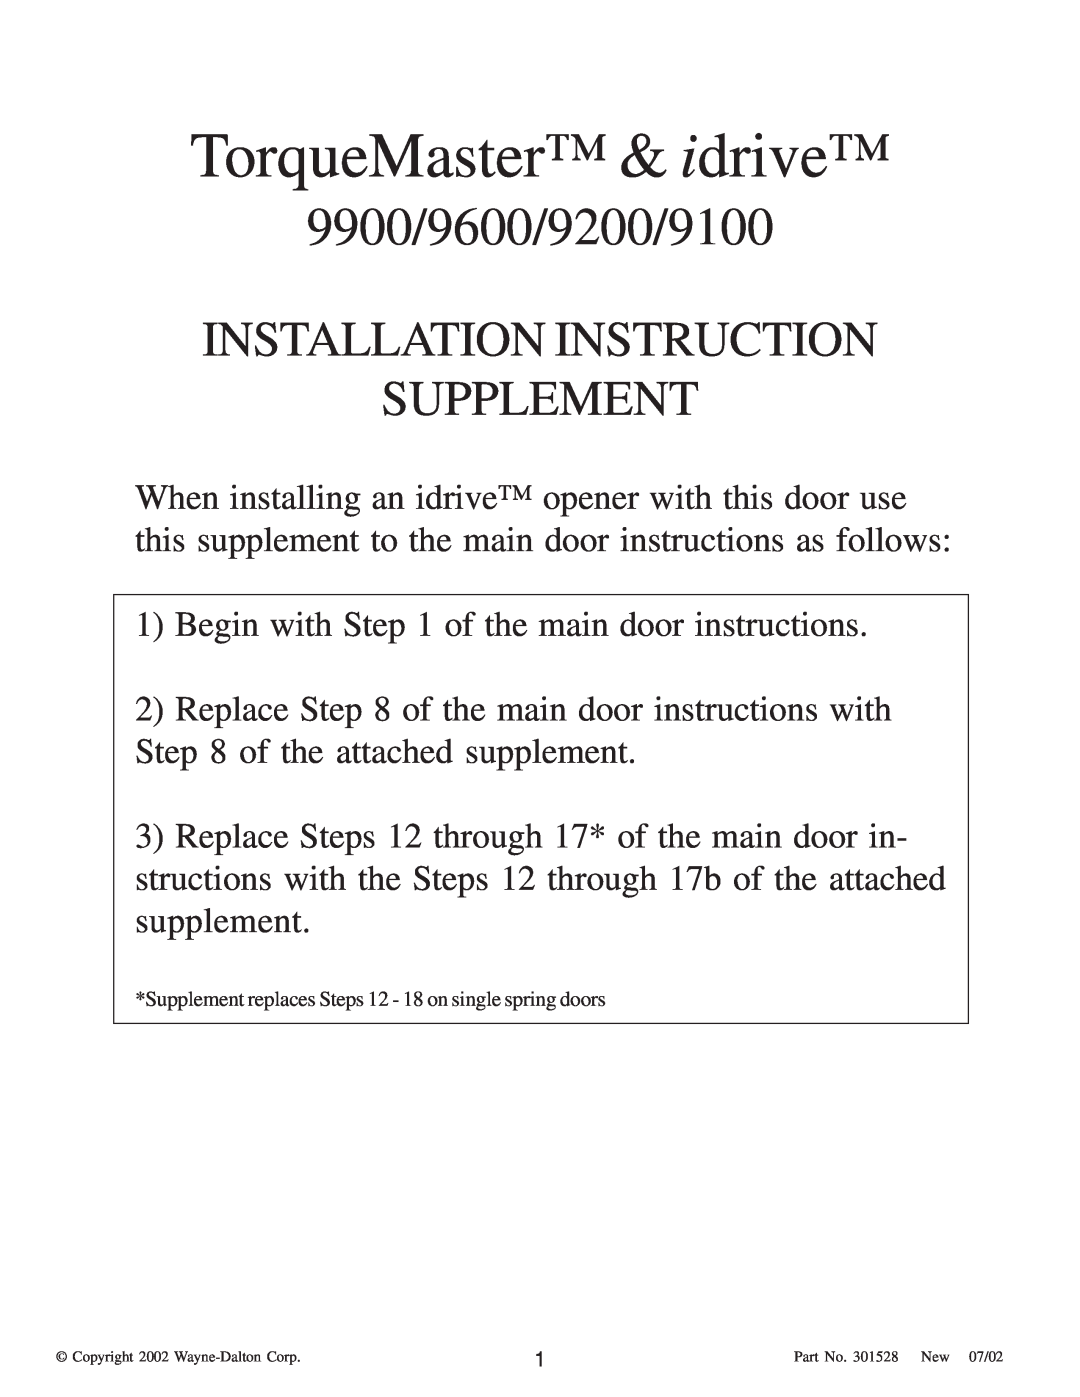 Wayne-Dalton installation instructions 9100, 9400 and 9600 Series, TorqueMaster Plus - Single and Double Spring 